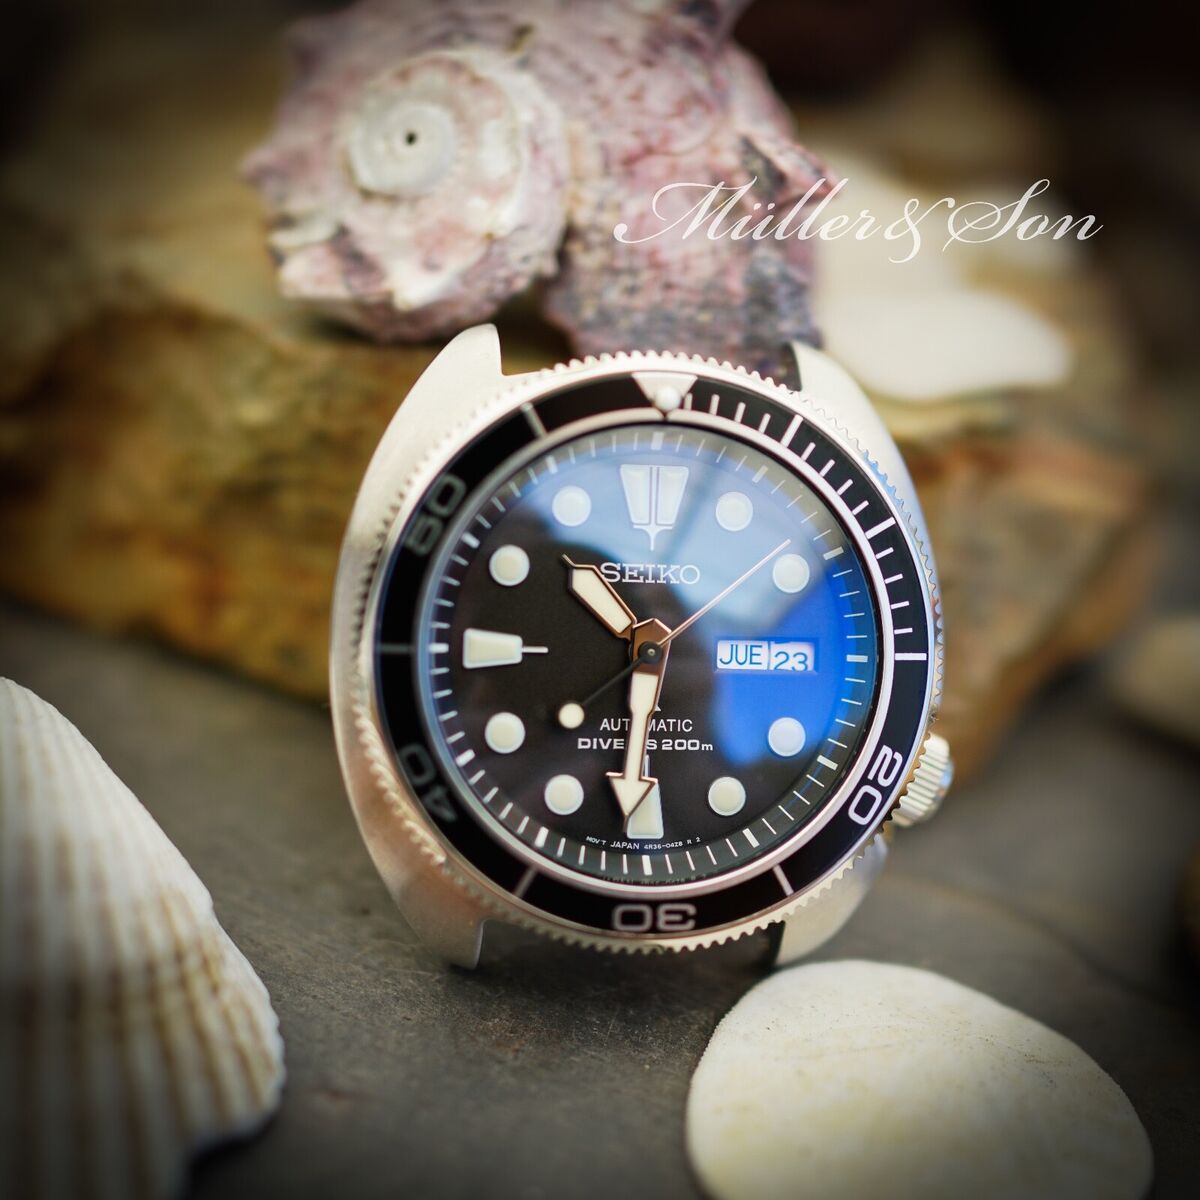 Turdle coin edge bezel suggestions - The Dive Watch Connection